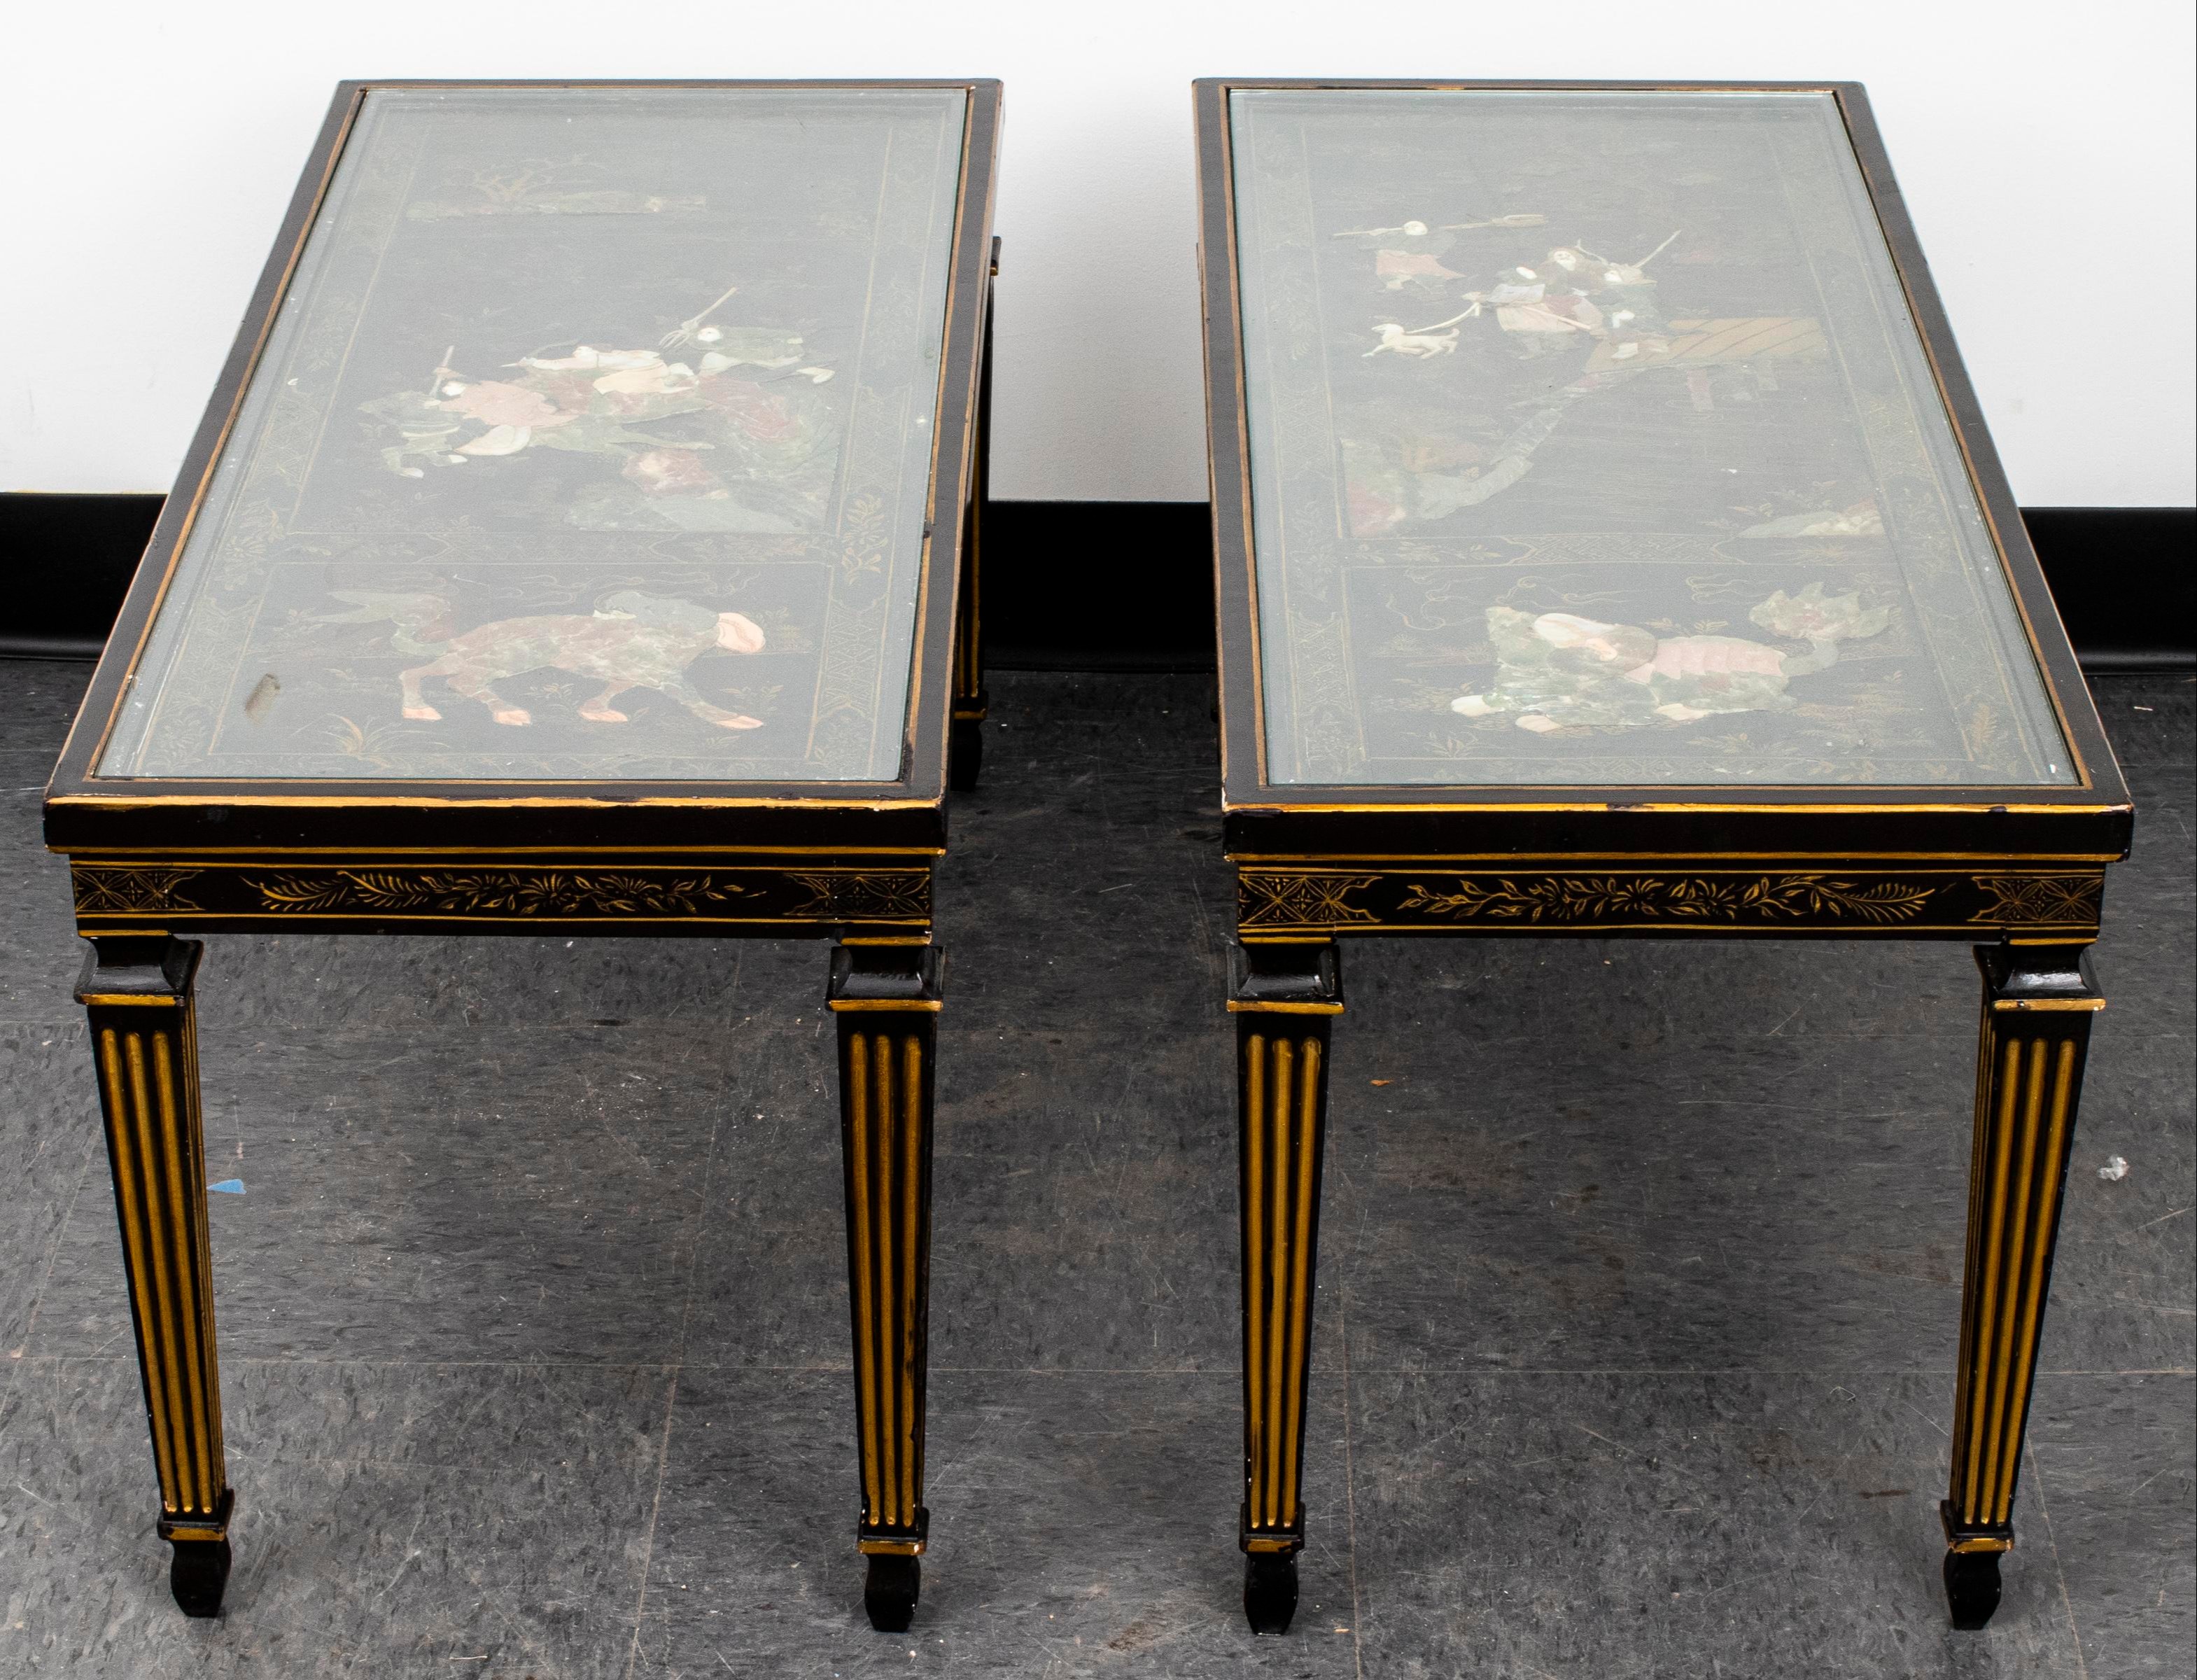 CHINESE HARDSTONE INLAID SIDE TABLES  3c42ac